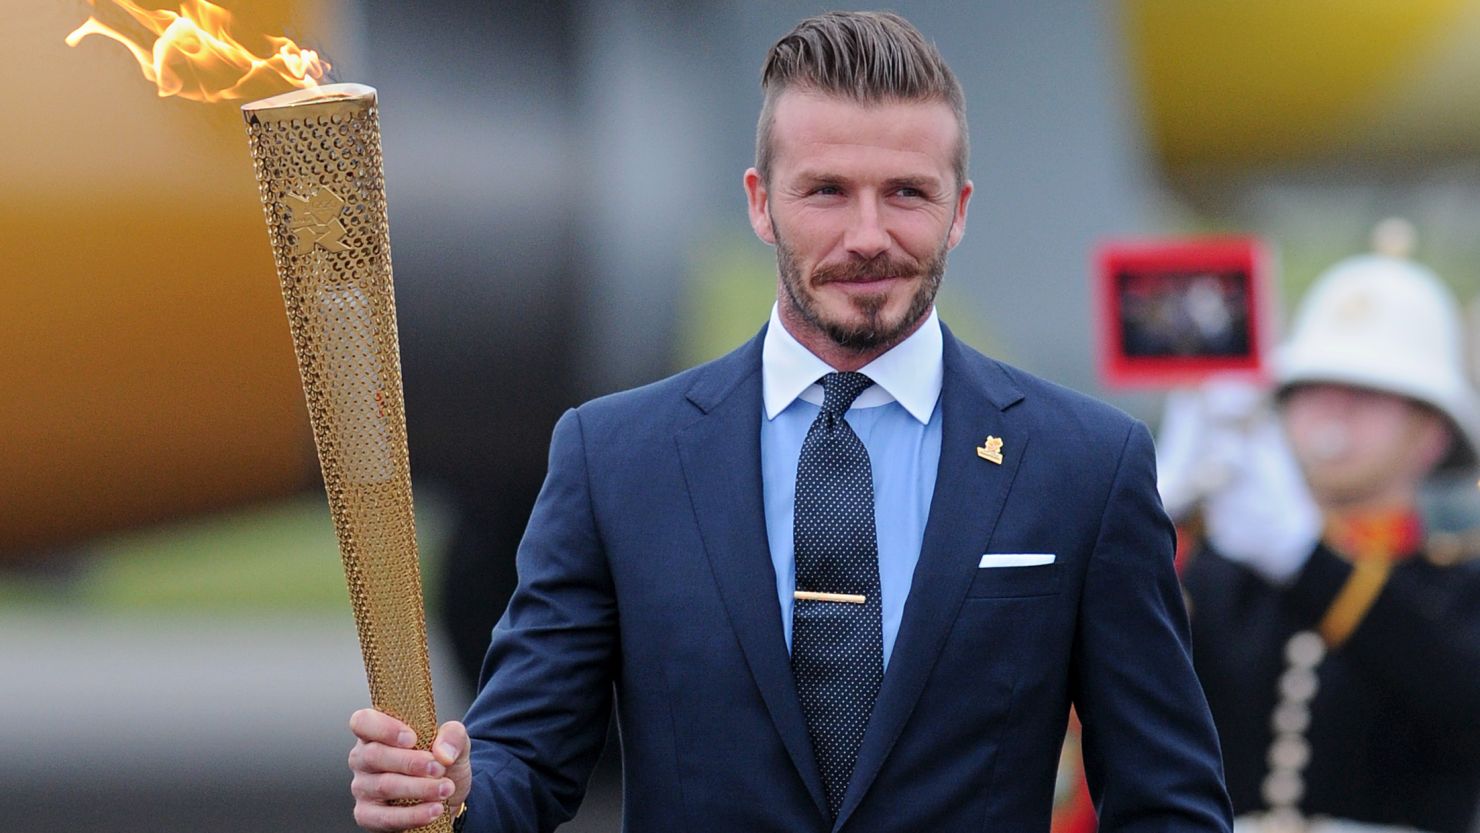 Los Angeles Galaxy star David Beckham was part of London's successful bid to host the 2012 Games.